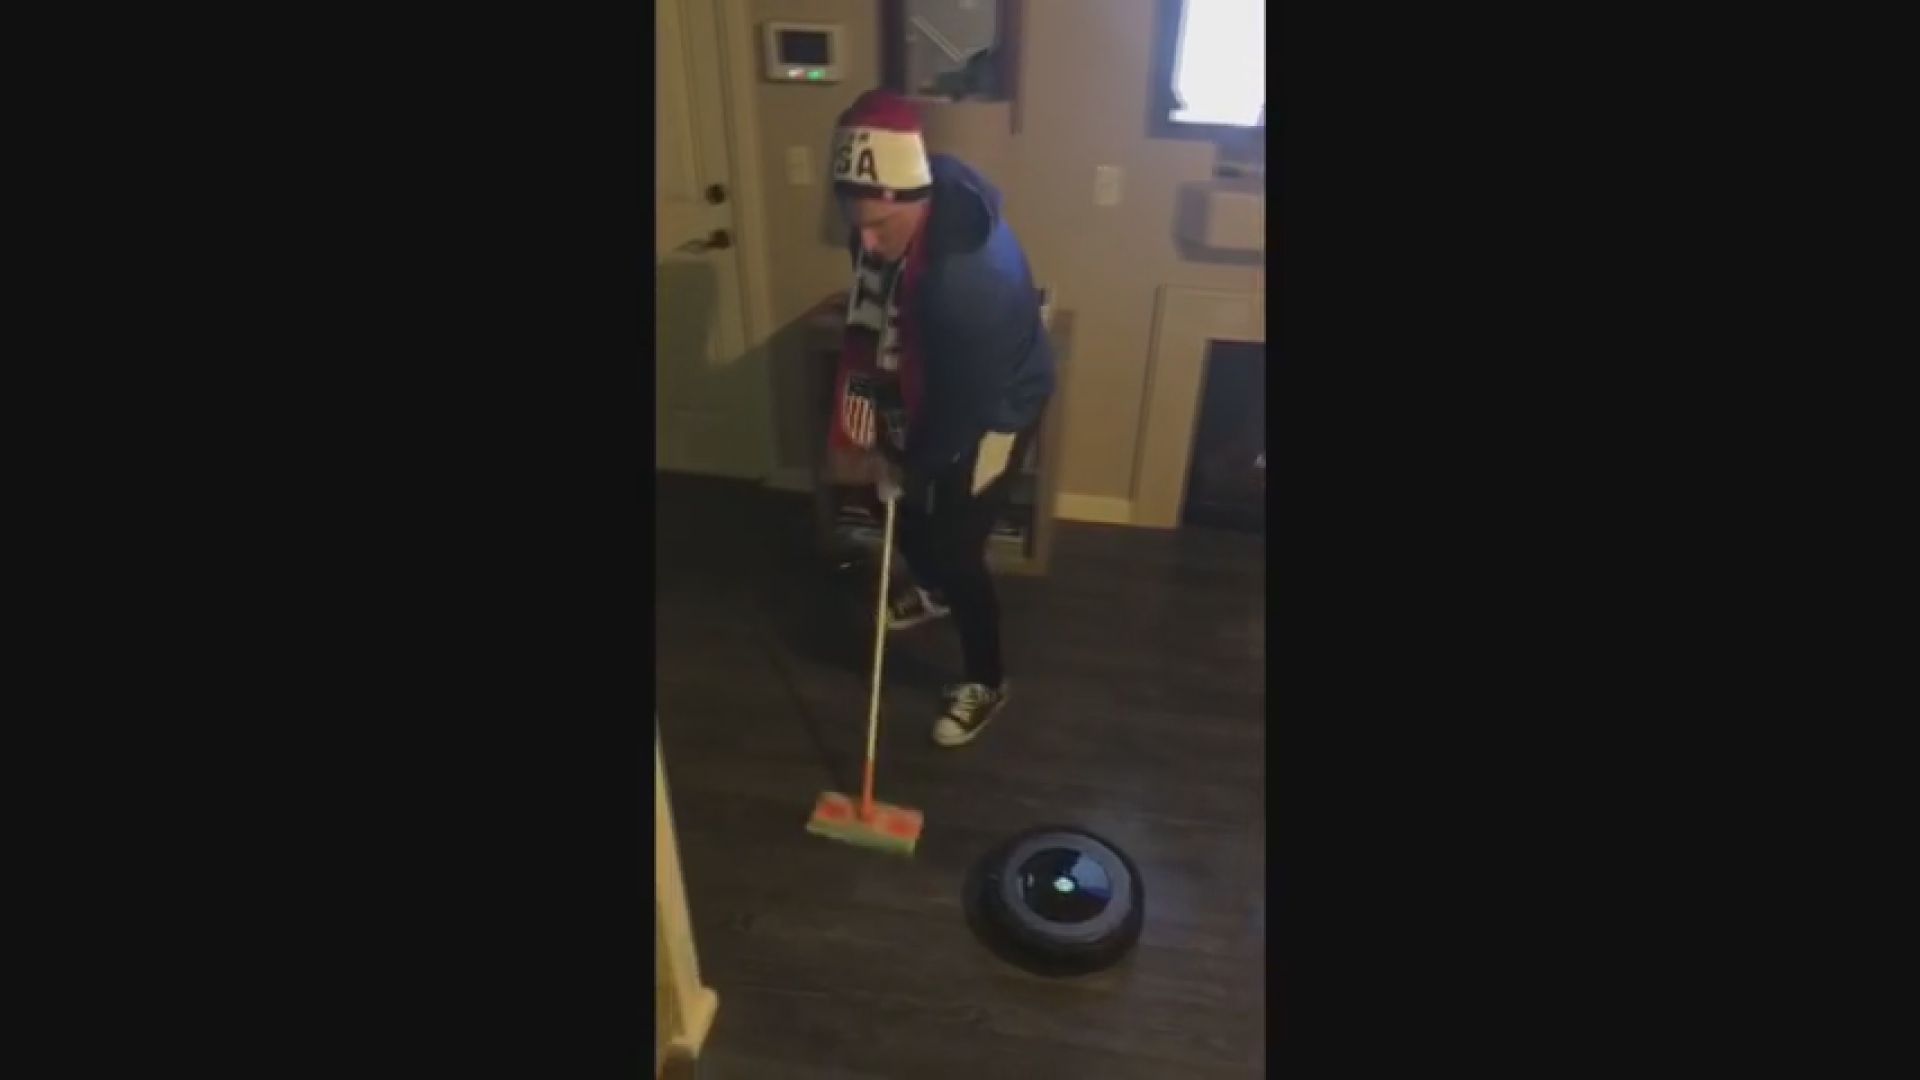 This Colorado dad curling with a is | 9news.com